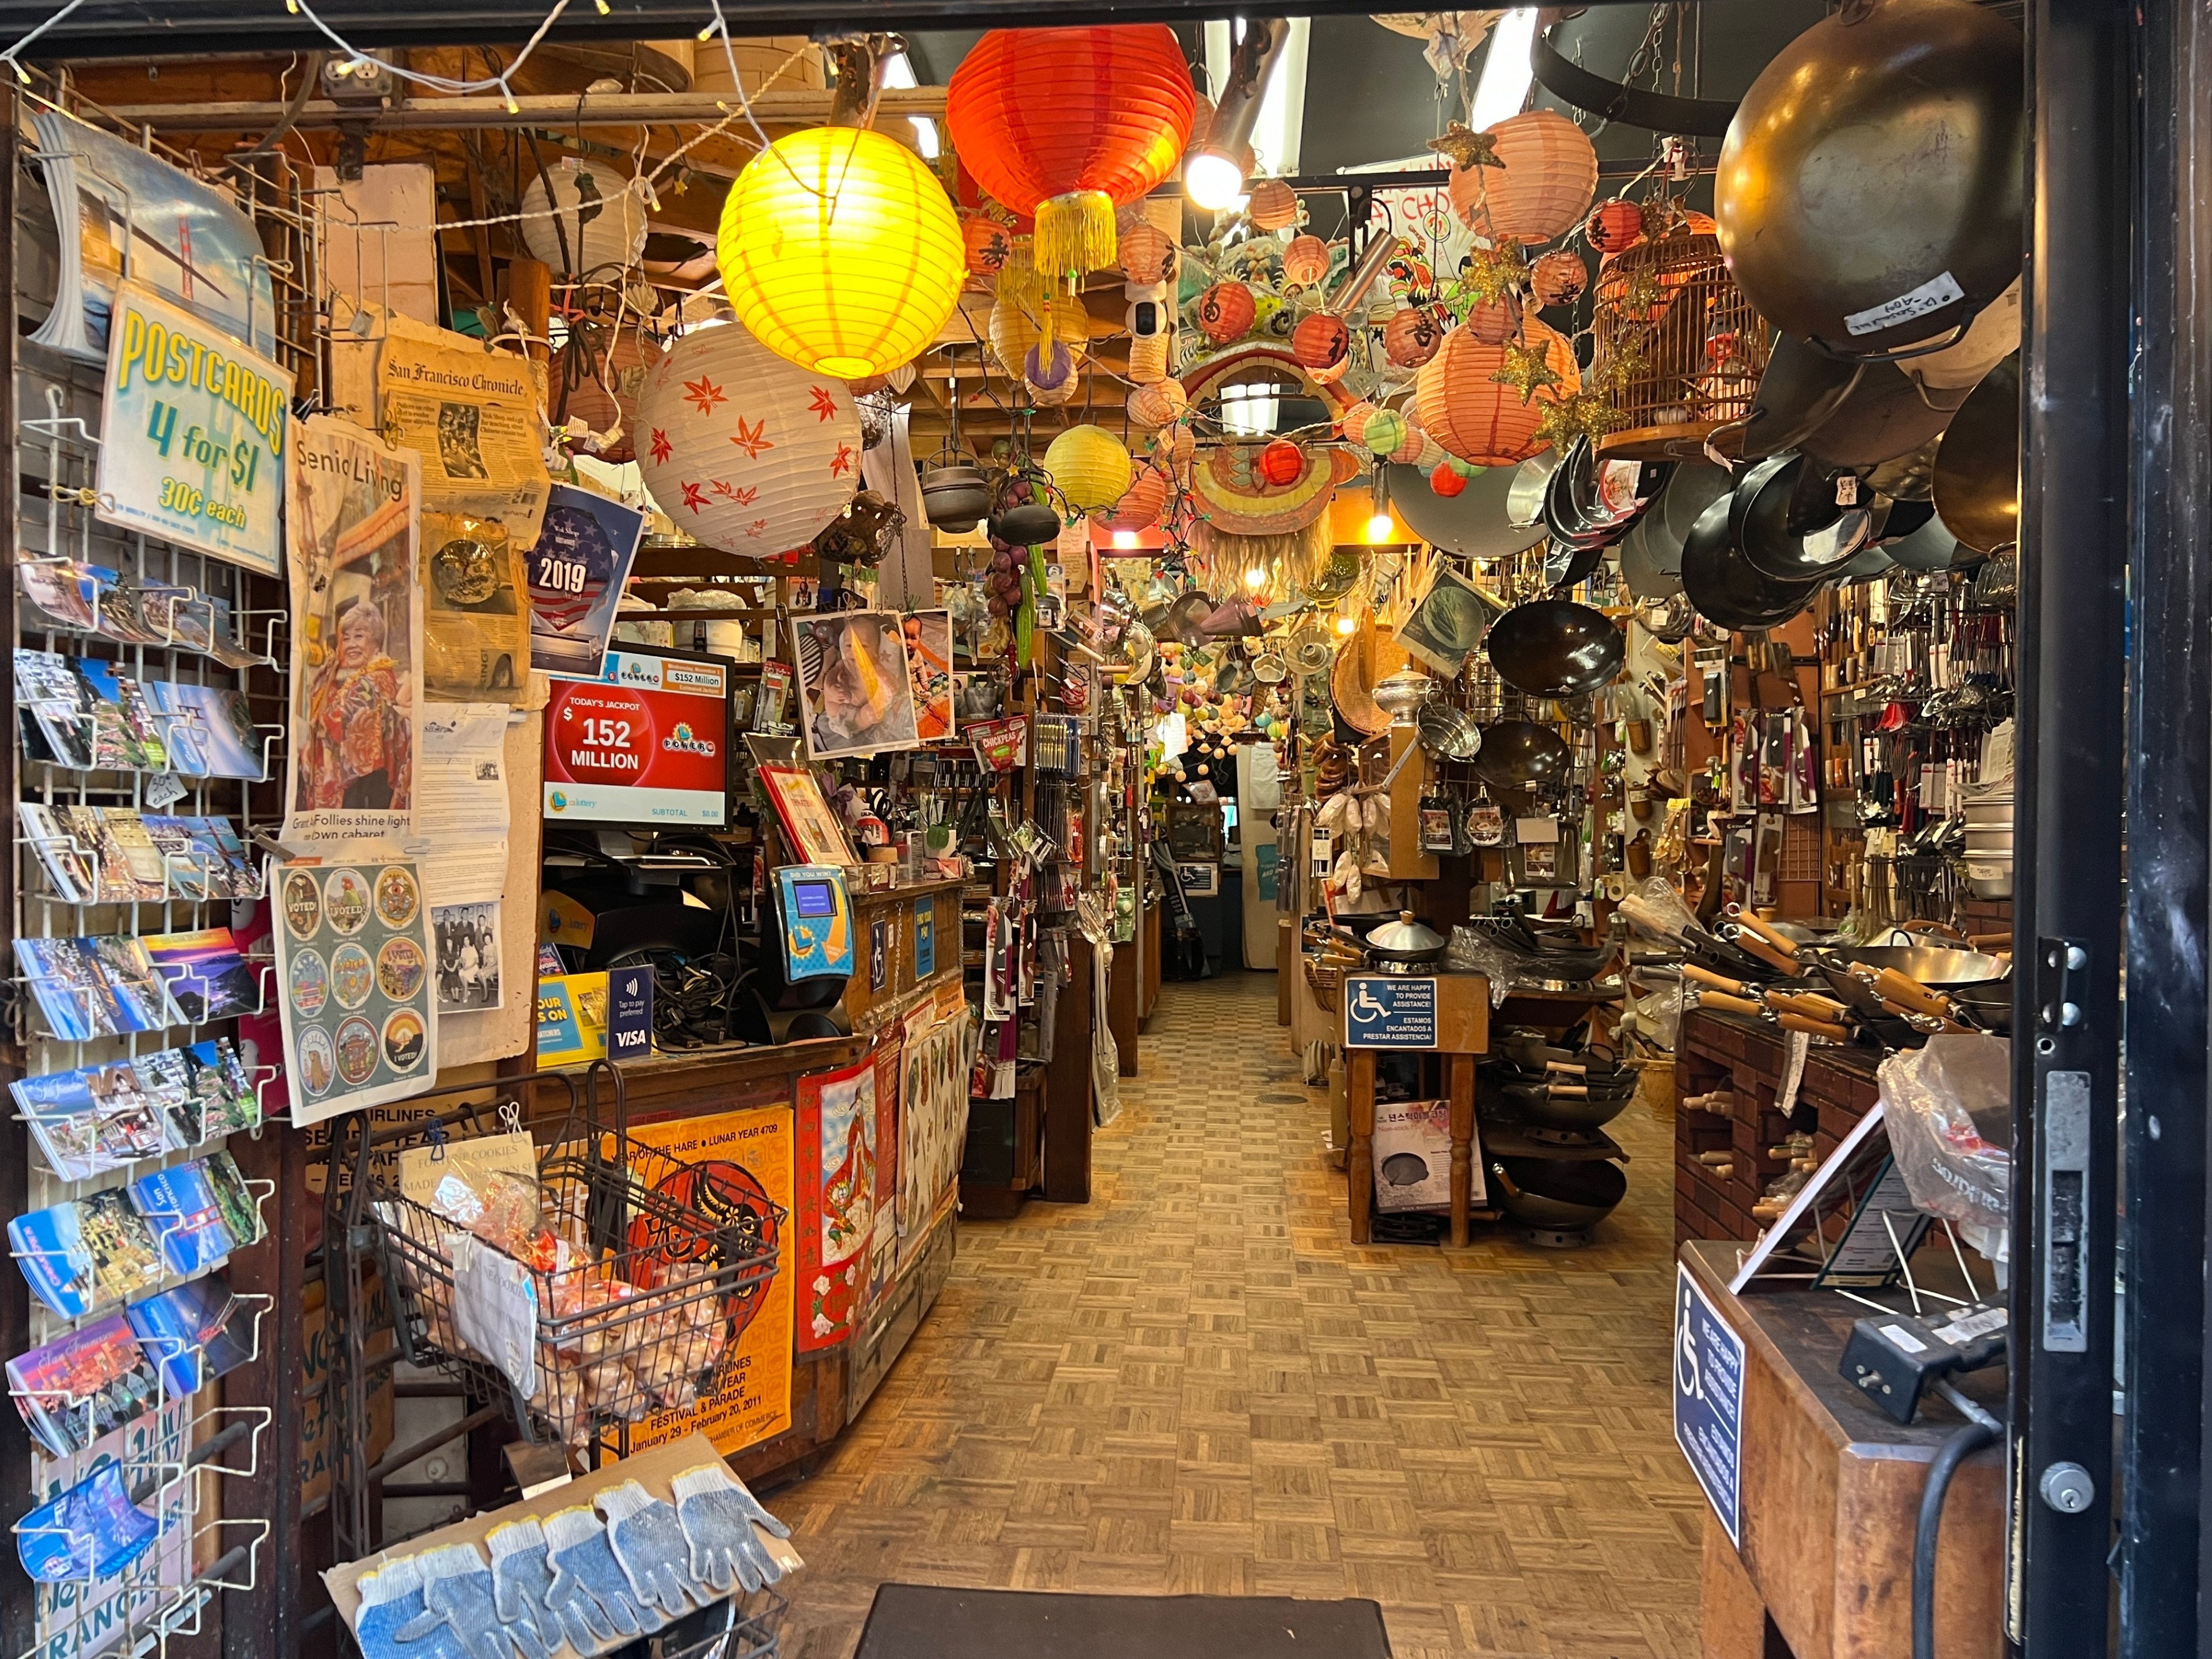 The entrance to a store shows hanging woks and pans, kitchen tools, postcards and paper lanterns.